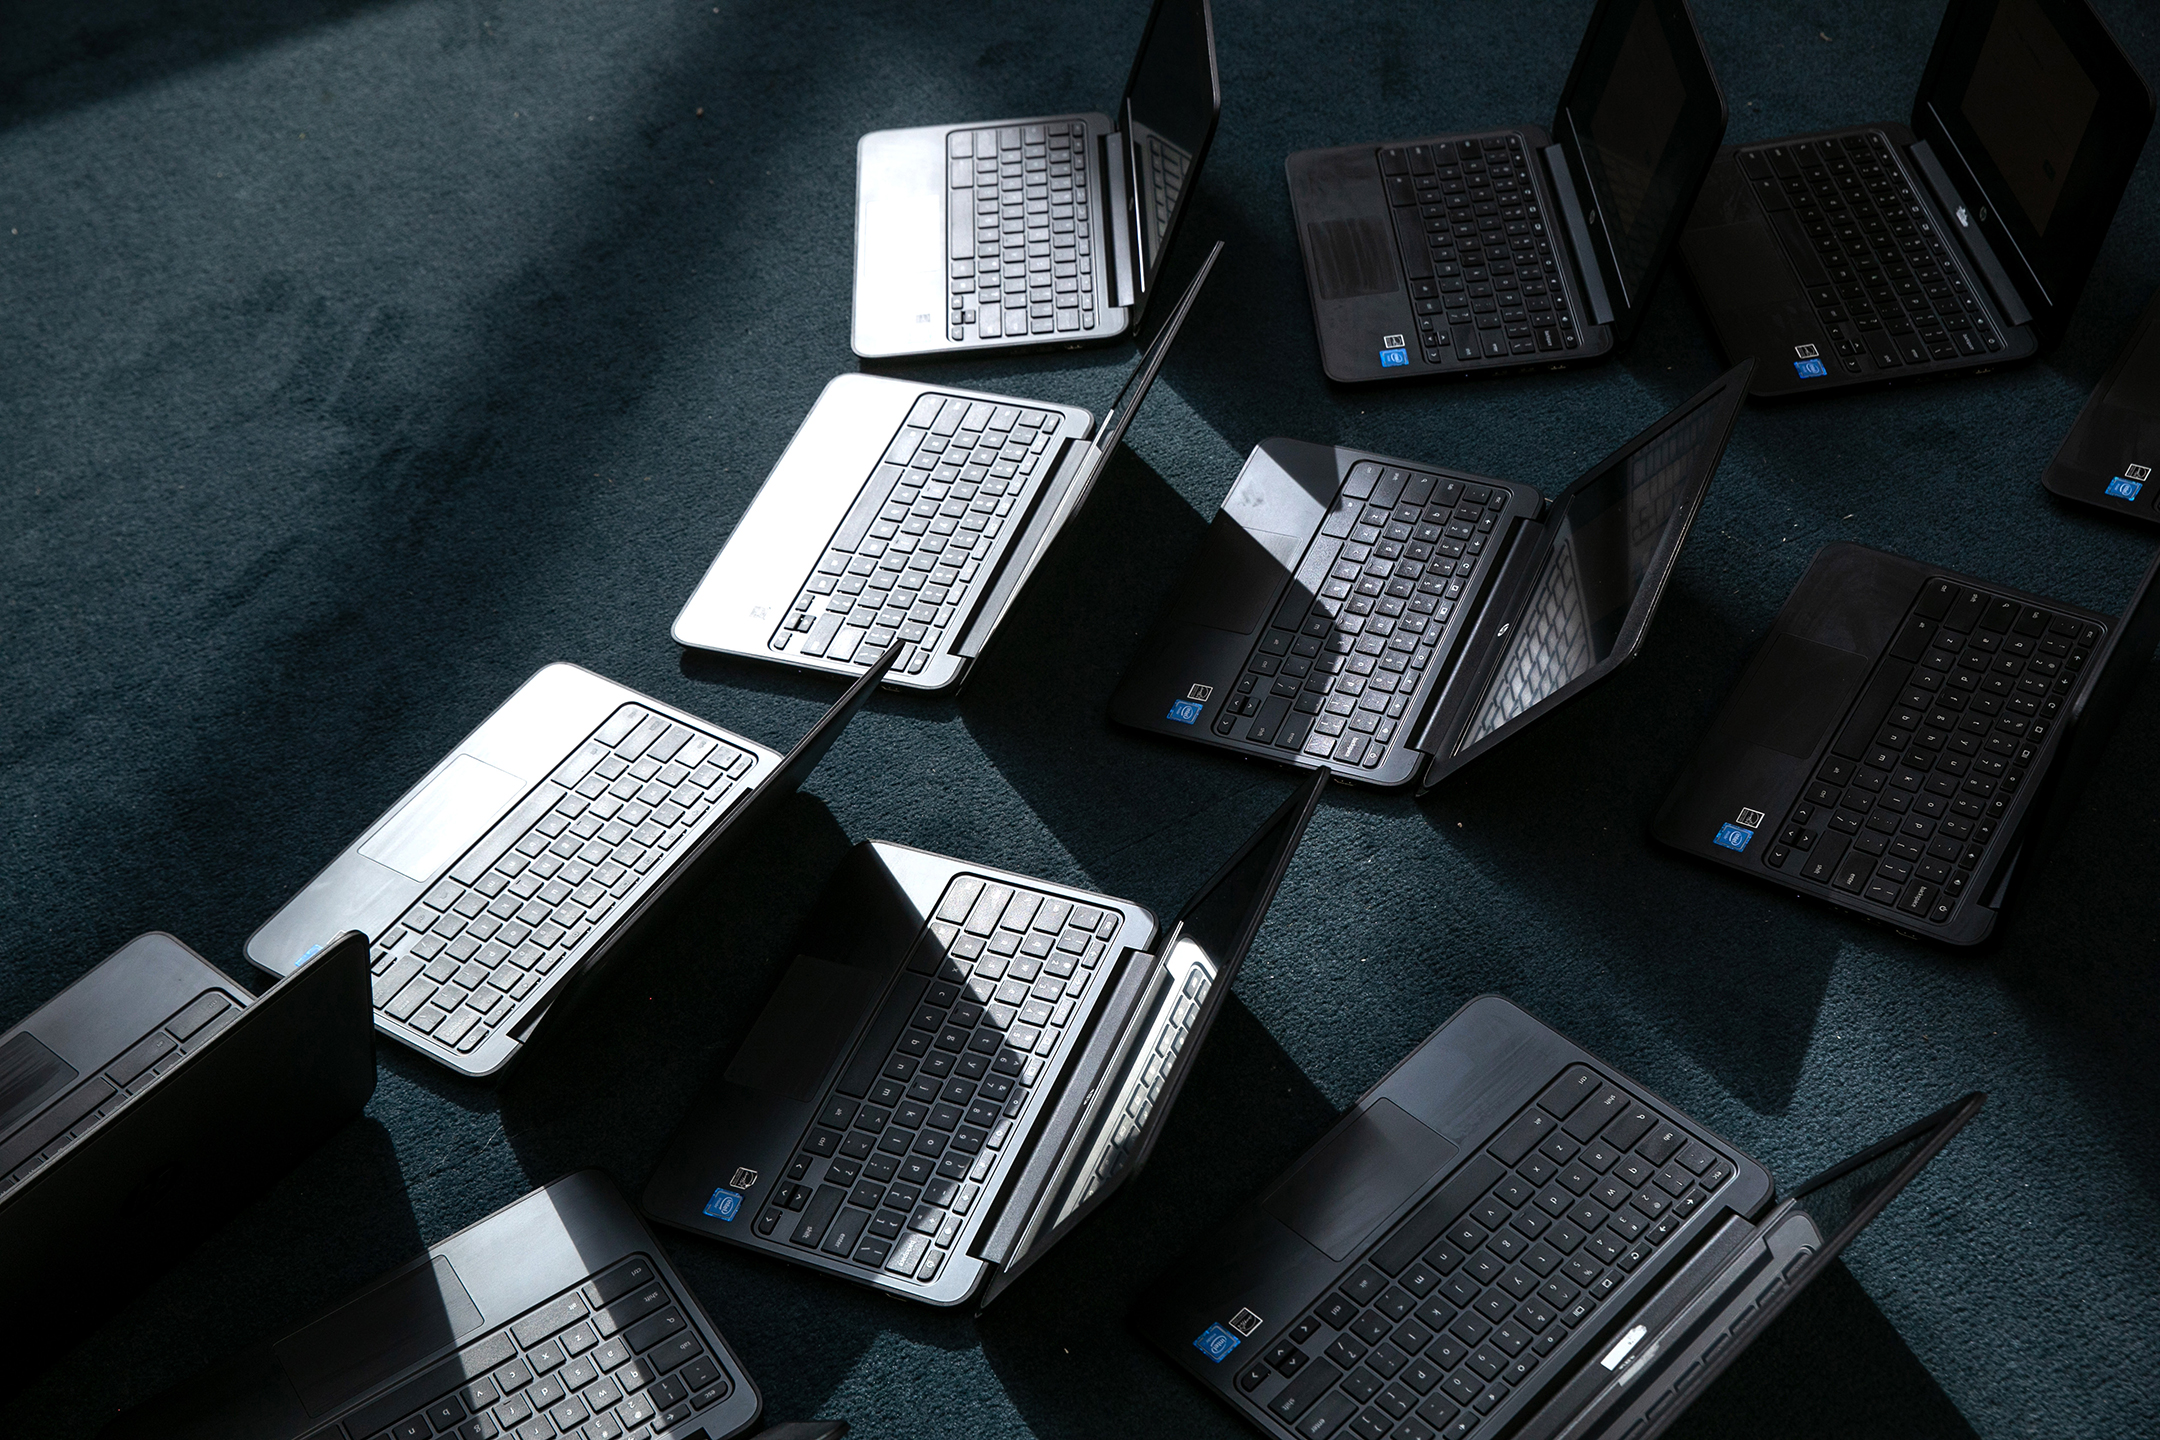 A photo from above of a group of black laptops, open and sitting on a carpeted floor